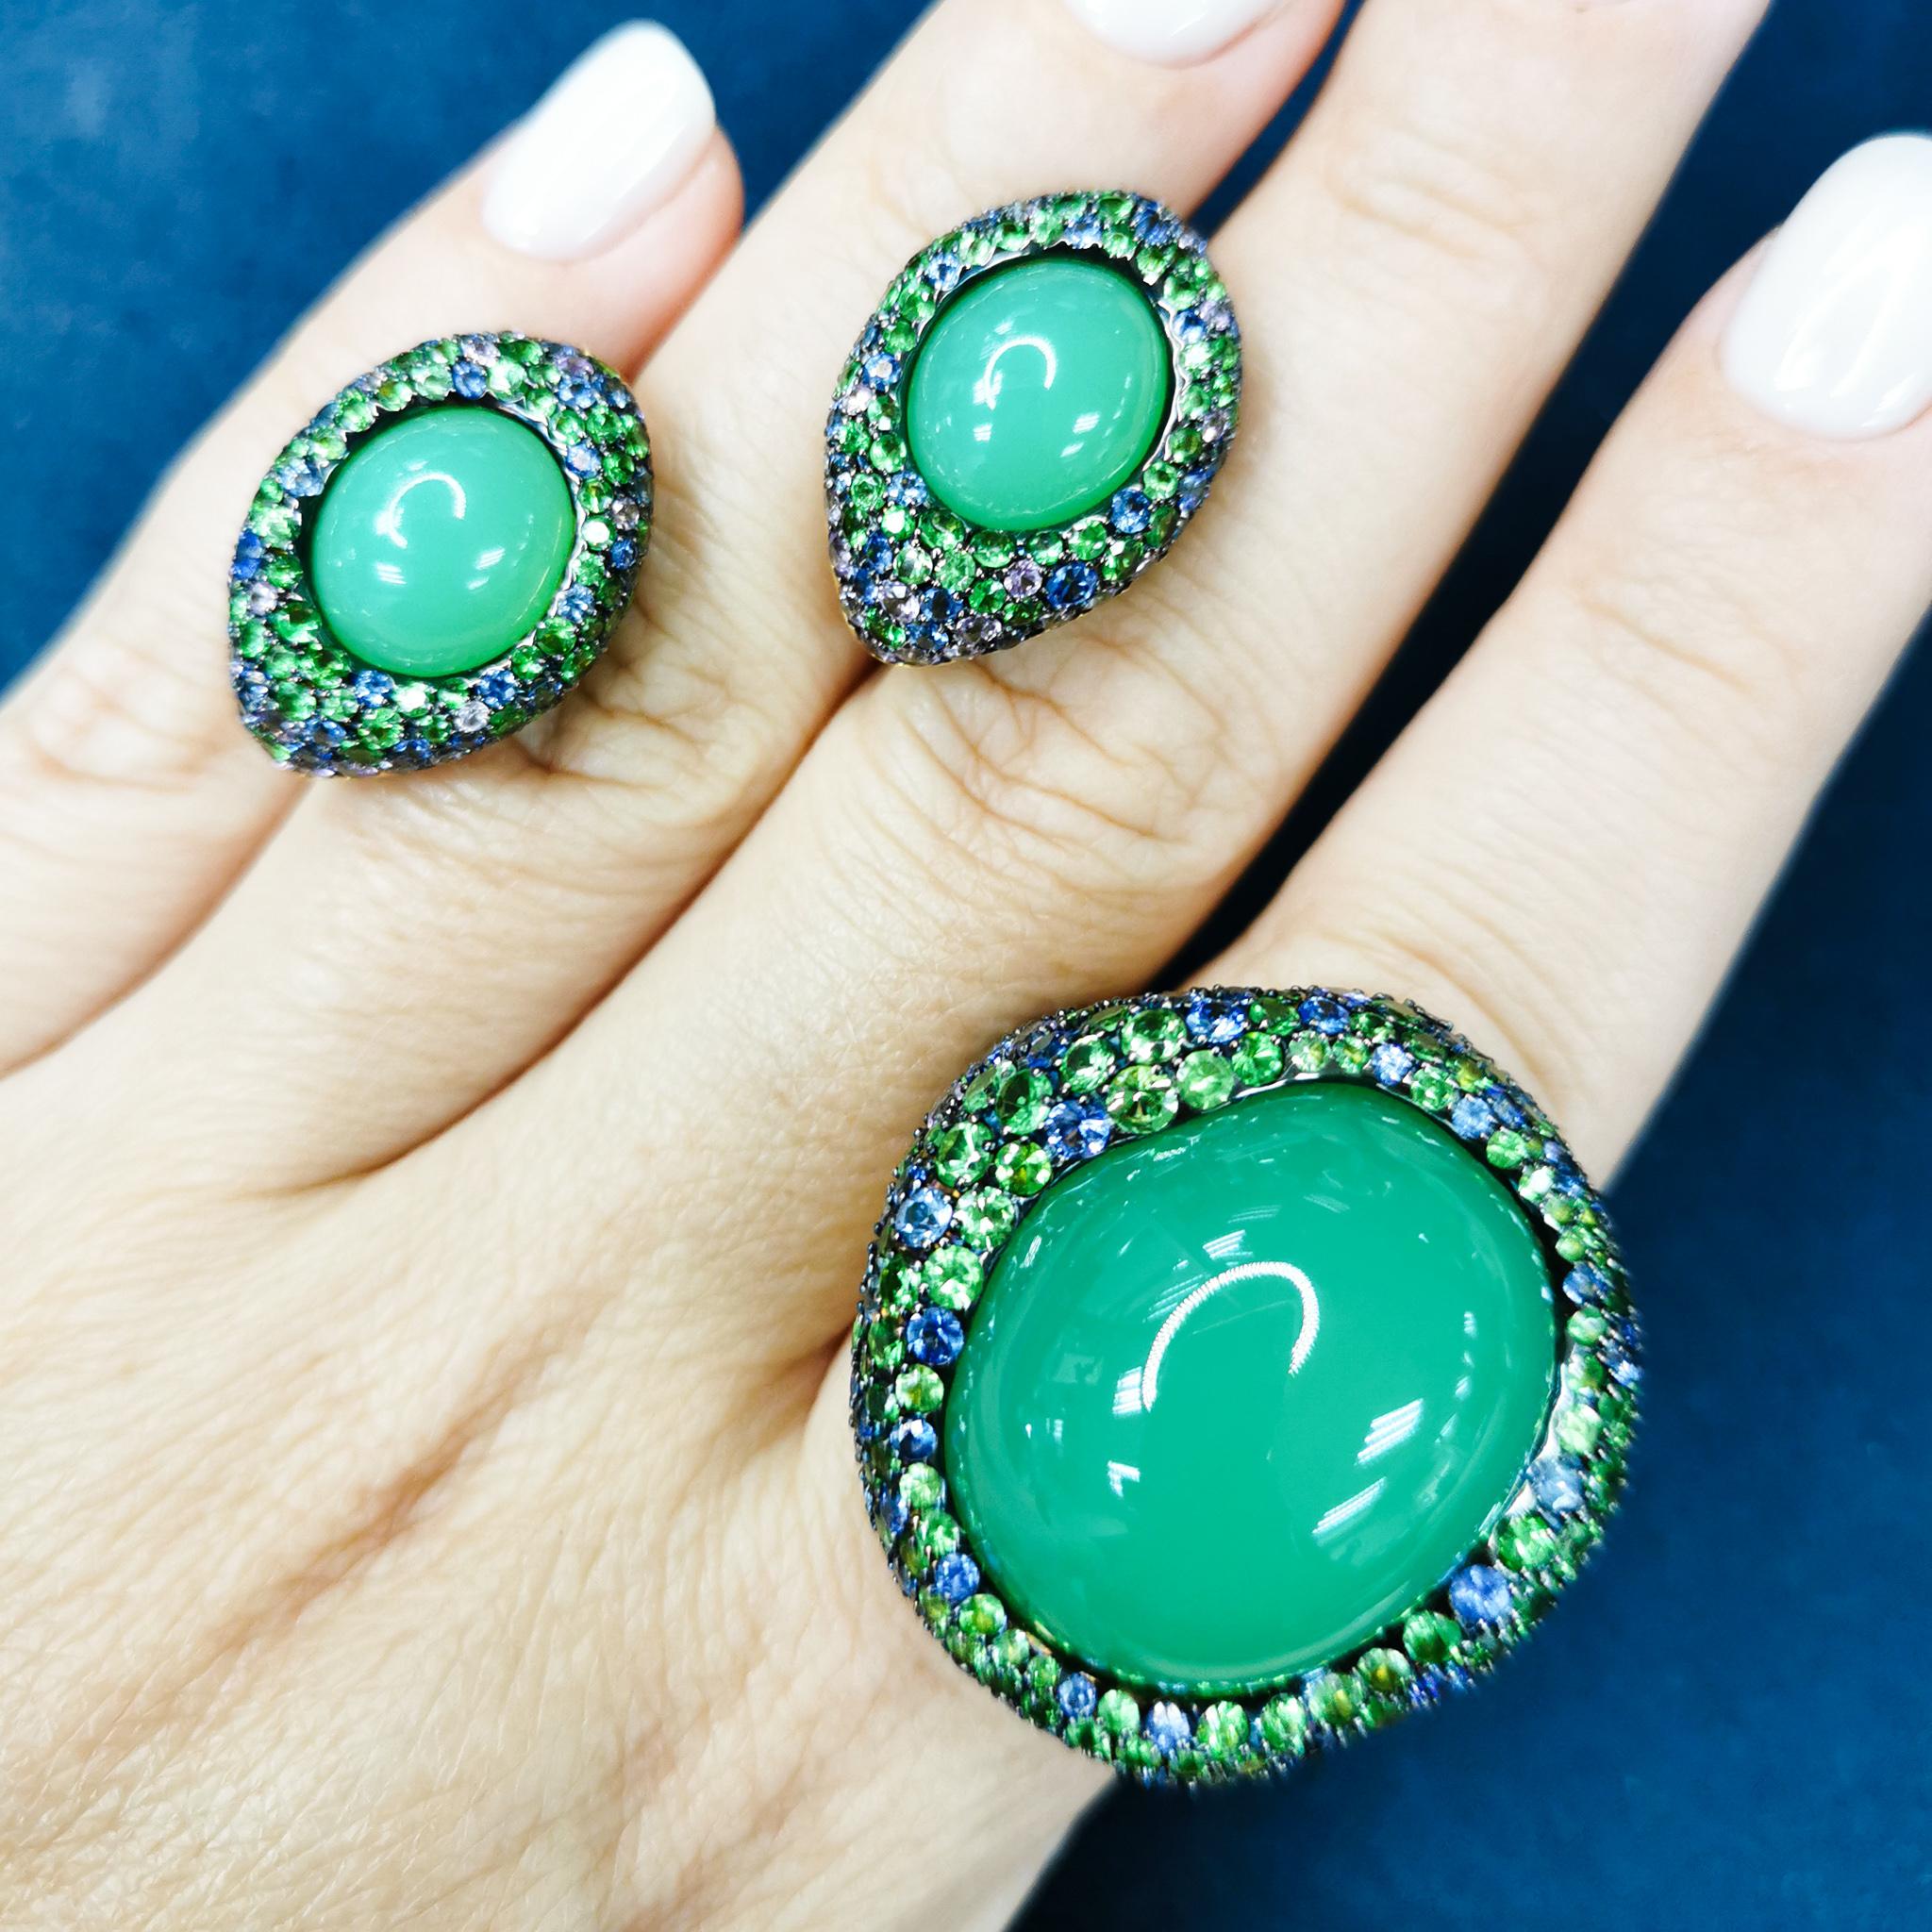 Chrysophrase Sapphires Tsavorites 18 Karat Yellow Gold Suite
Absolutely spectacular Australian Chrysoprase Cabochon-shape in our Suite from 